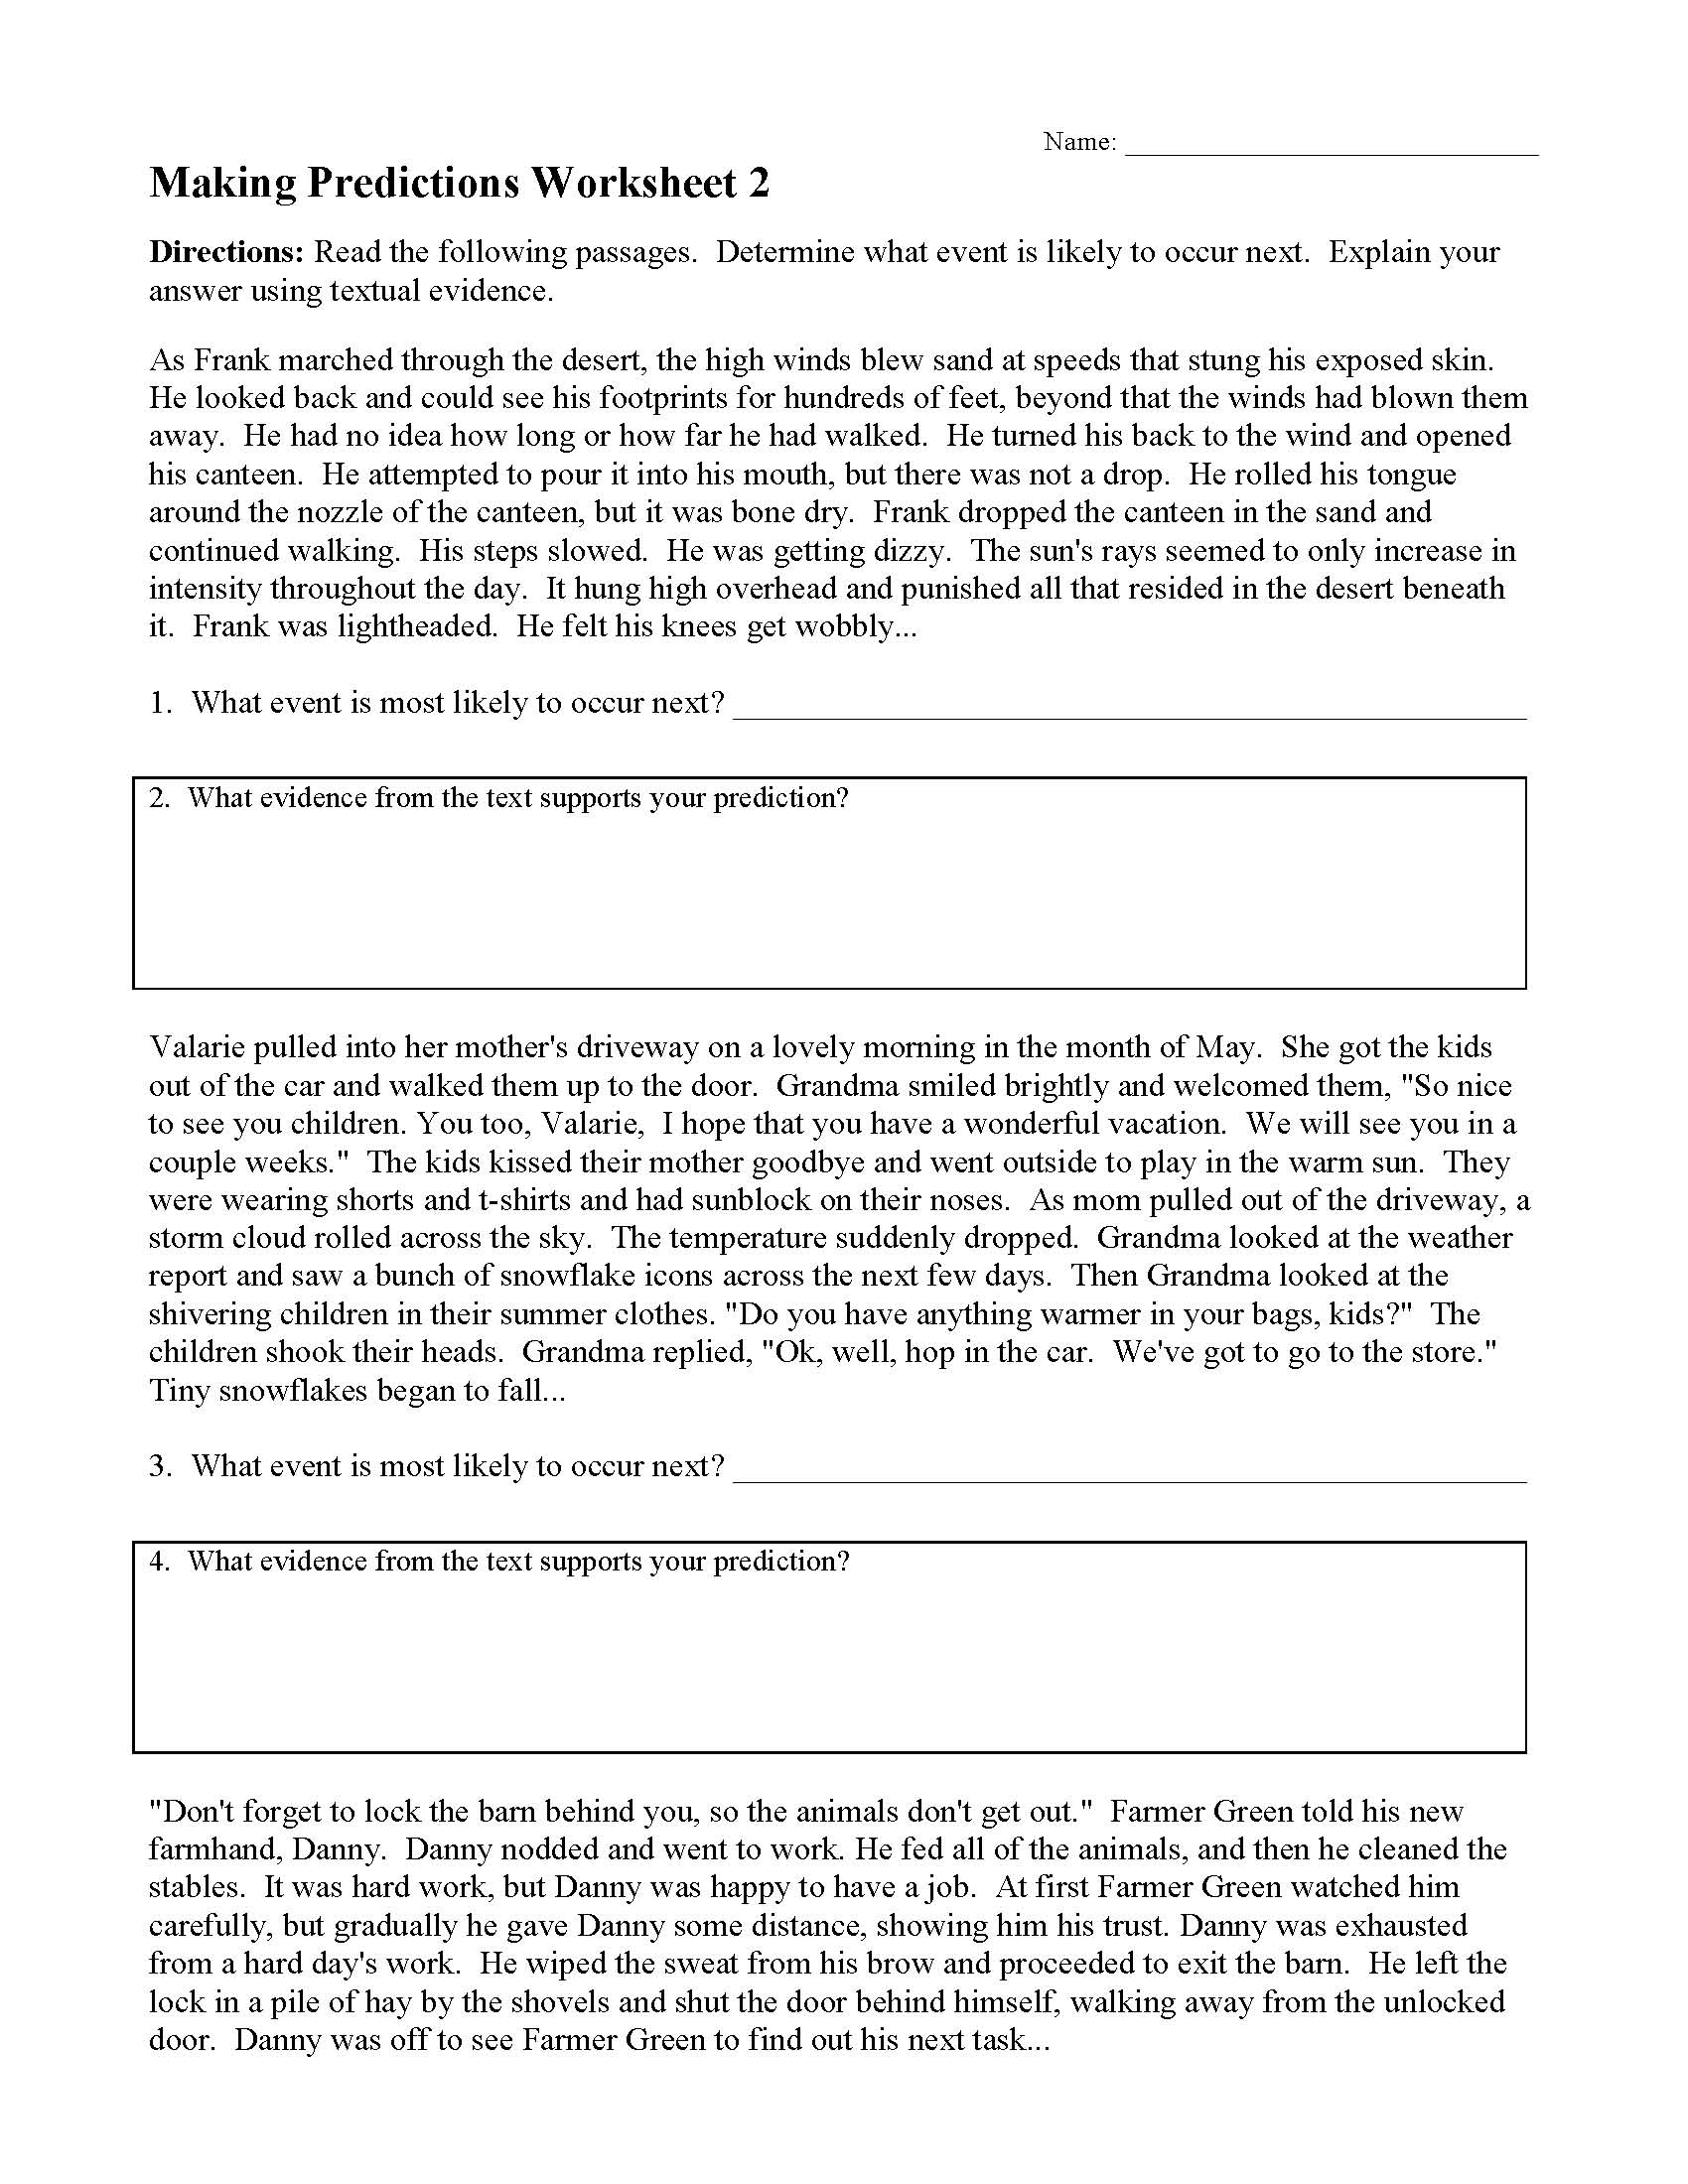 This is a preview image of Making Predictions Worksheet 2. Click on it to enlarge it or view the source file.